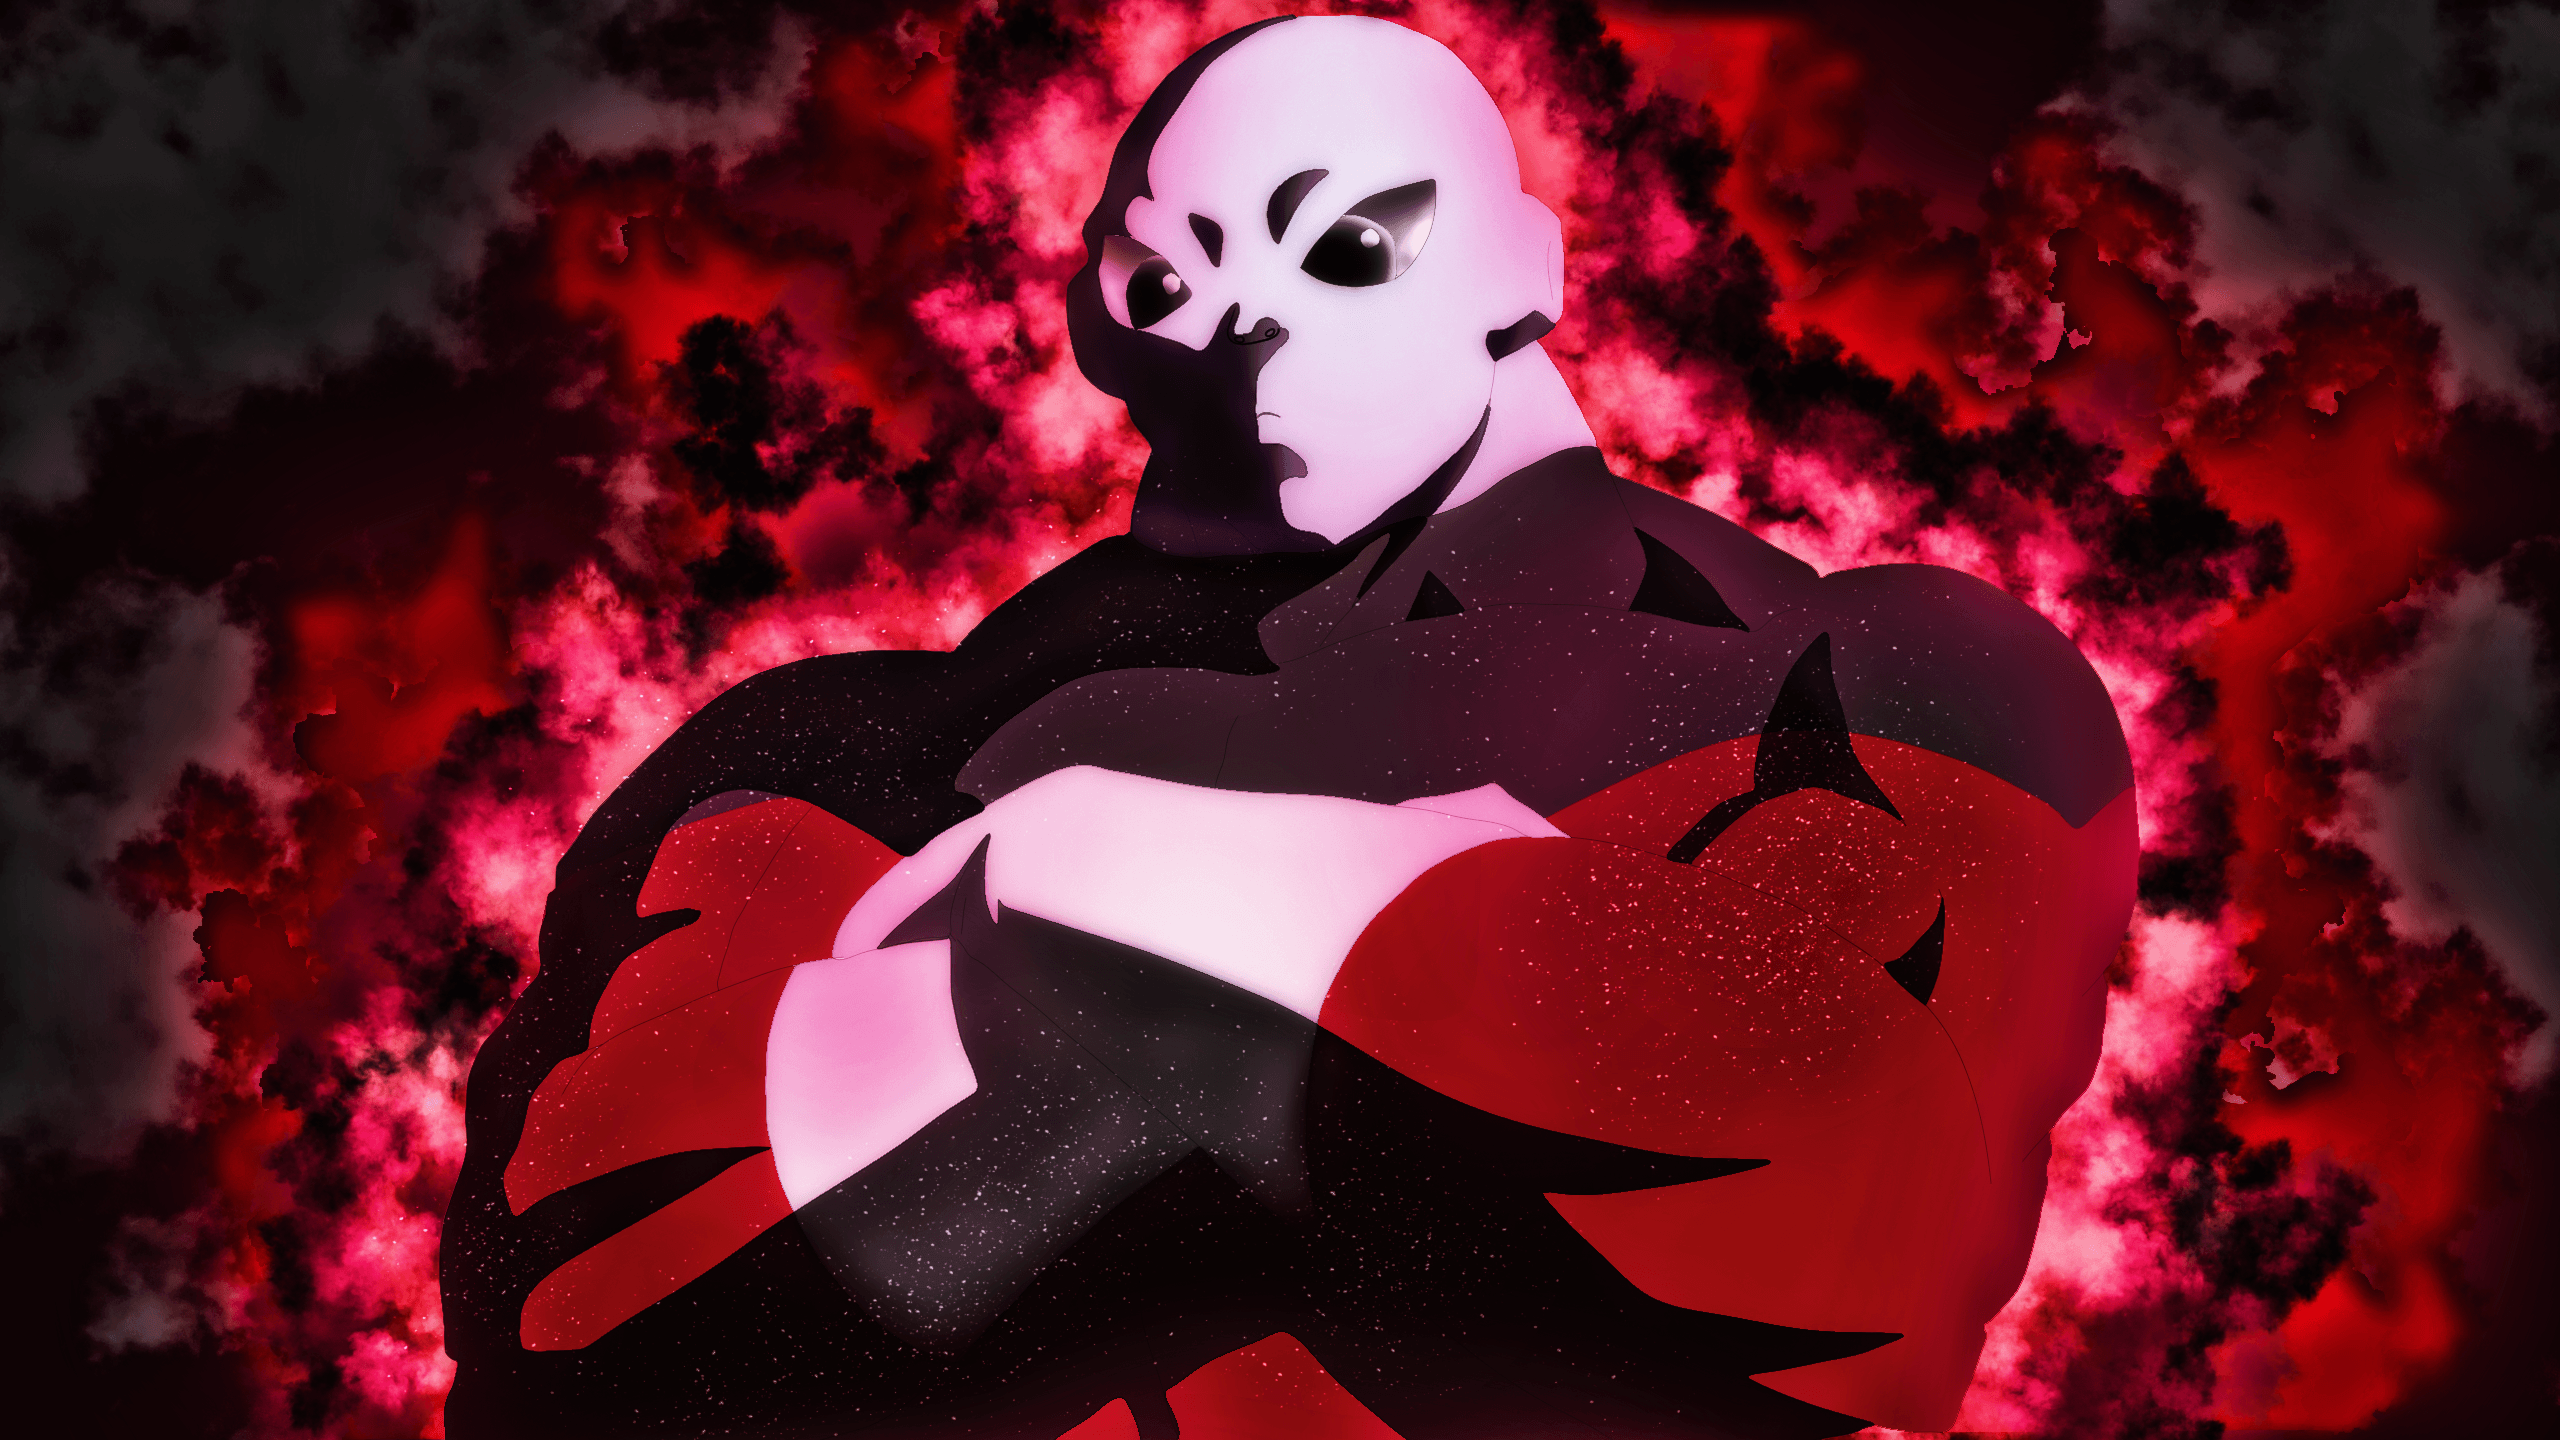 Jiren projecting his strength in a cool manner